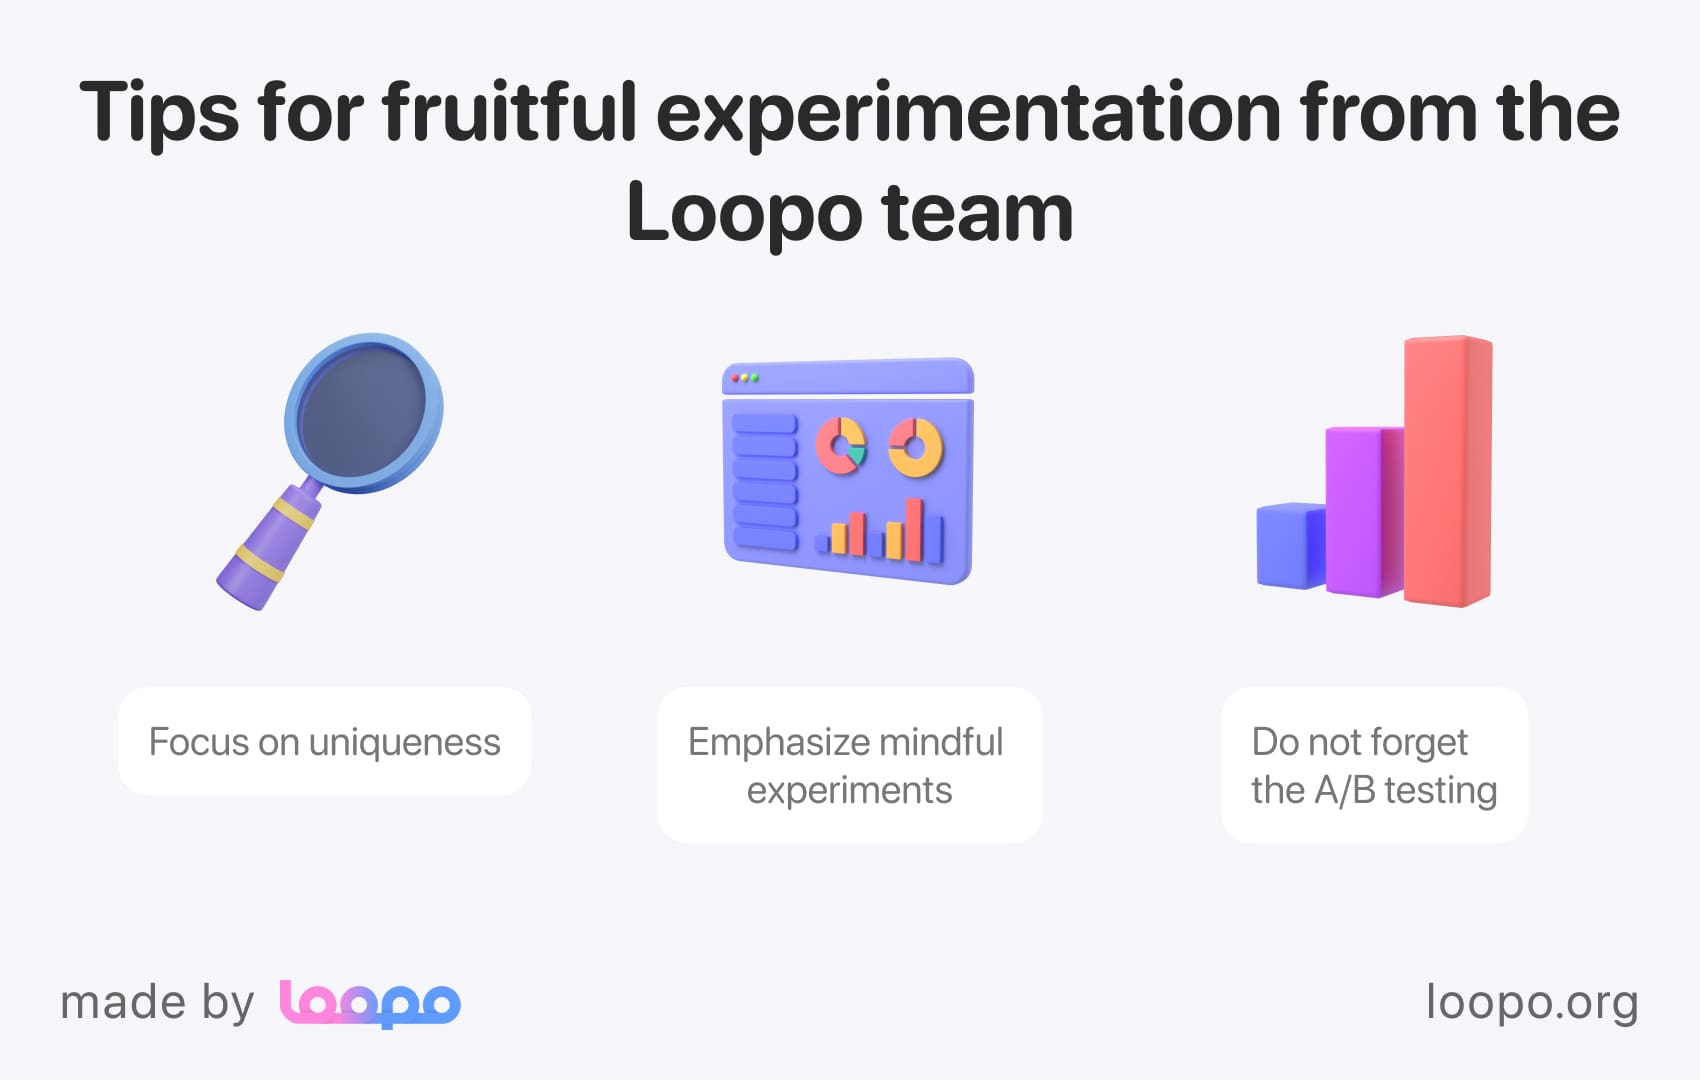 Unique content creation tips from Loopo team